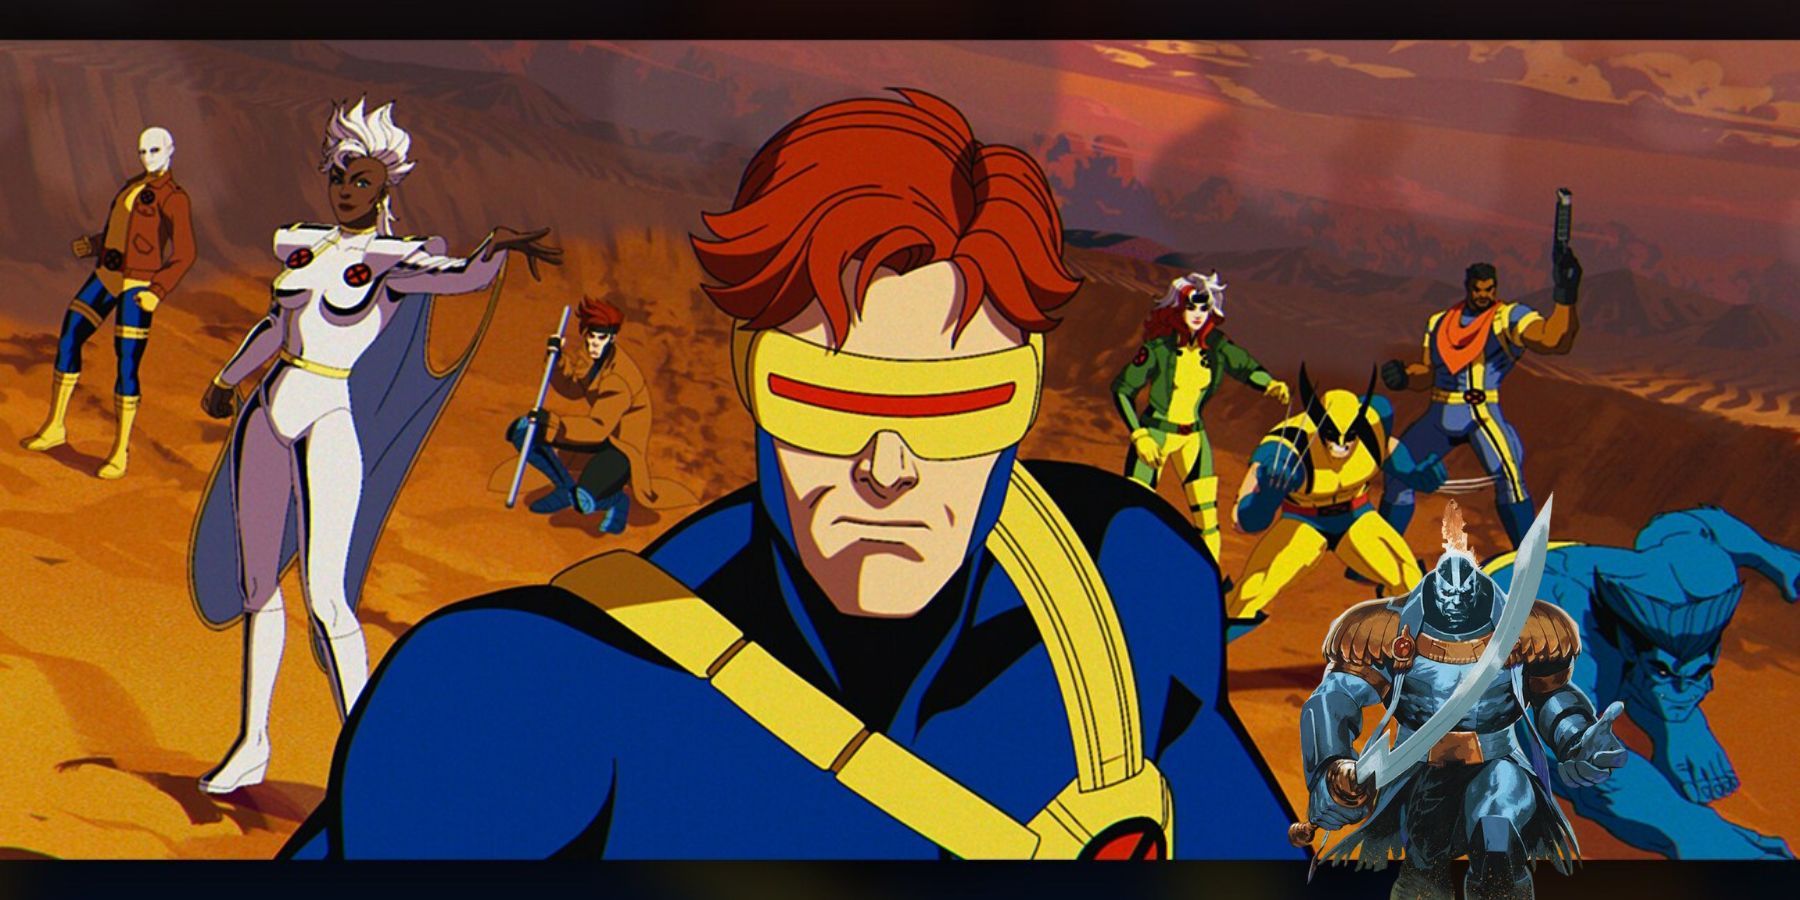 Will X-Men '97 Season 2 Include an Adaptation of Ages of Apocalypse